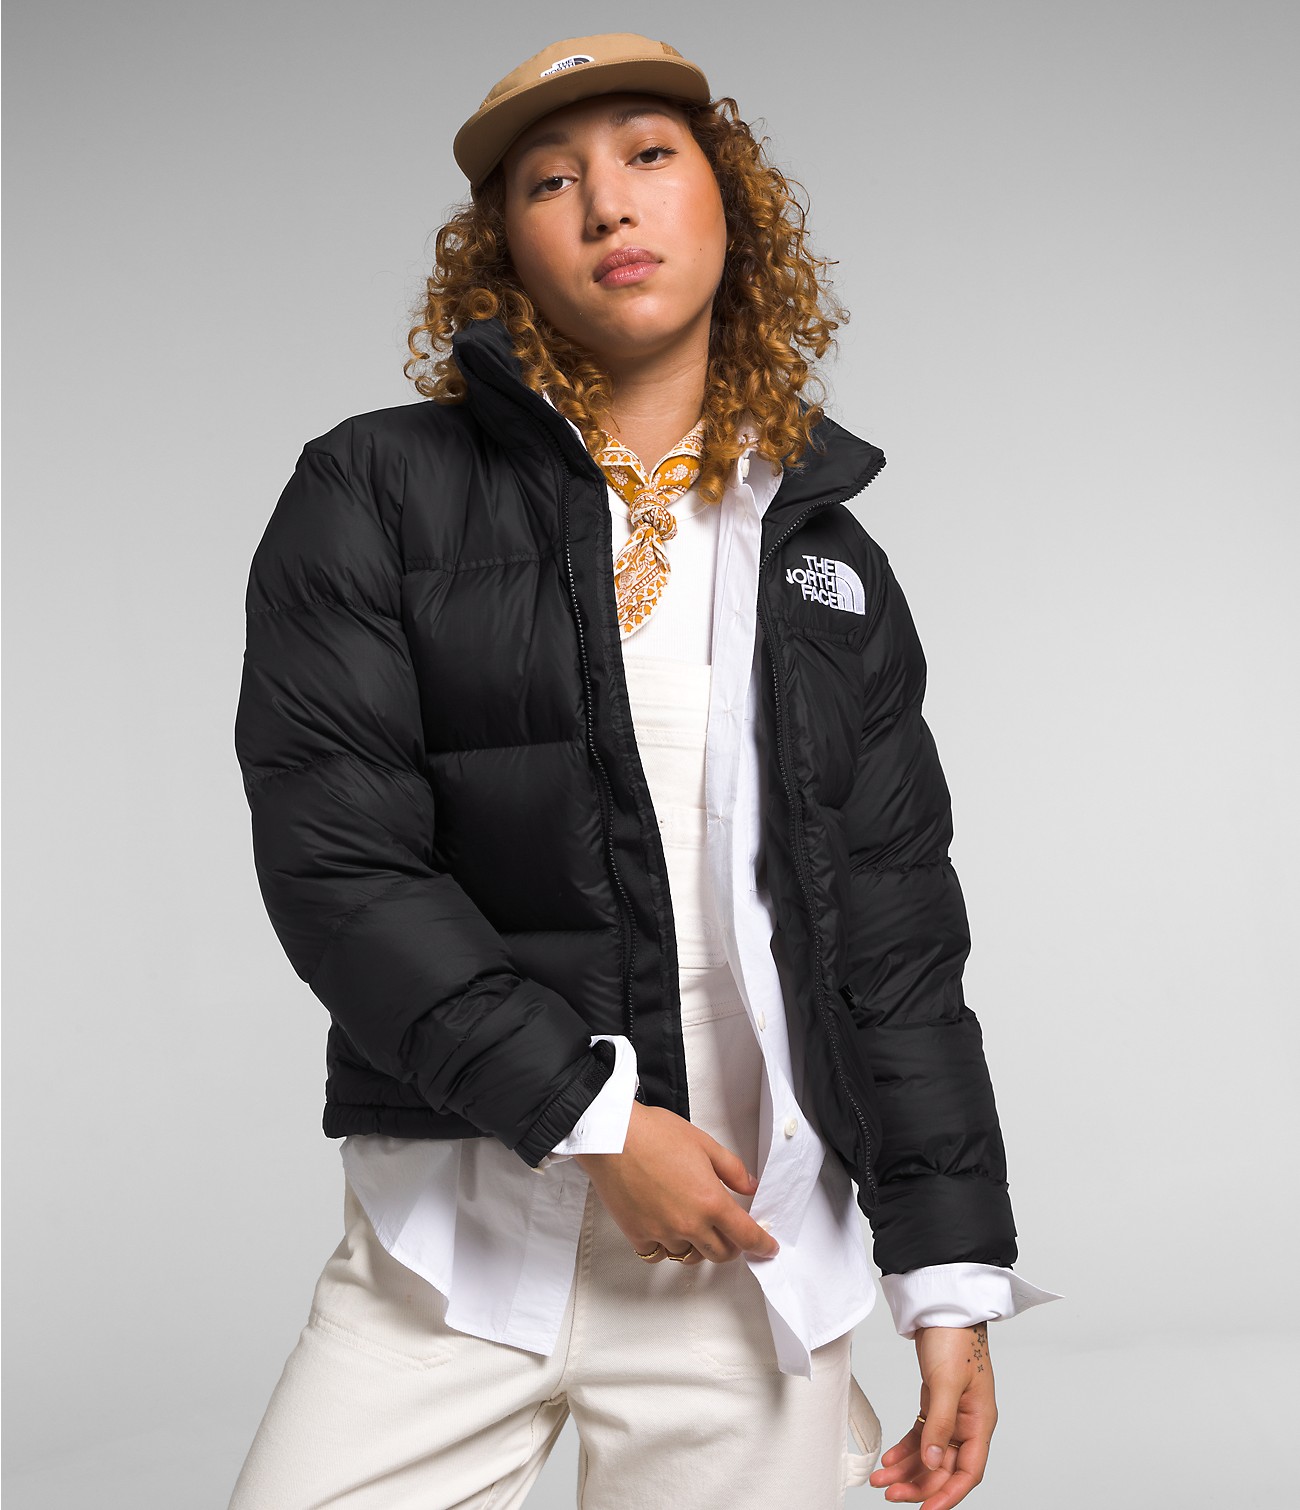 Unlock Wilderness' choice in the Eddie Bauer Vs North Face comparison, the 1996 Retro Nuptse Jacket by The North Face